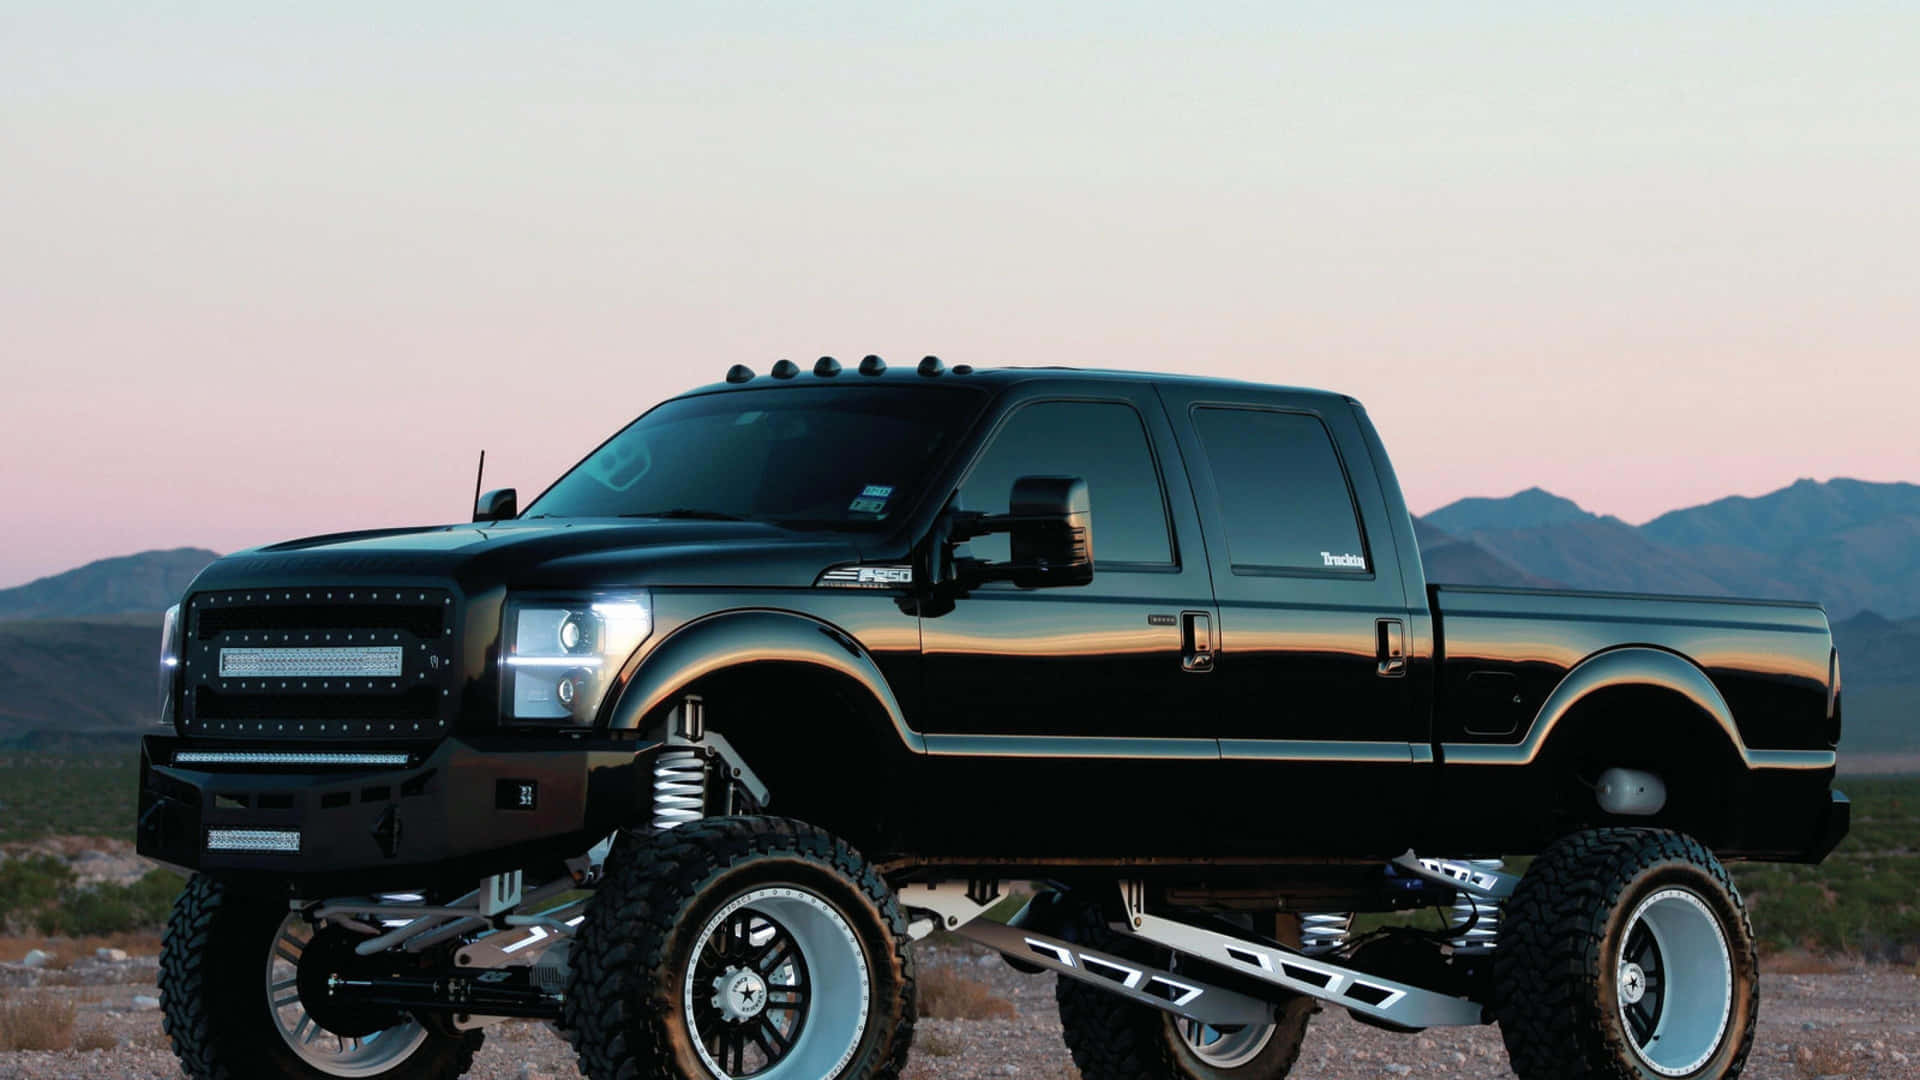 Black Lifted Truck Side View Wallpaper